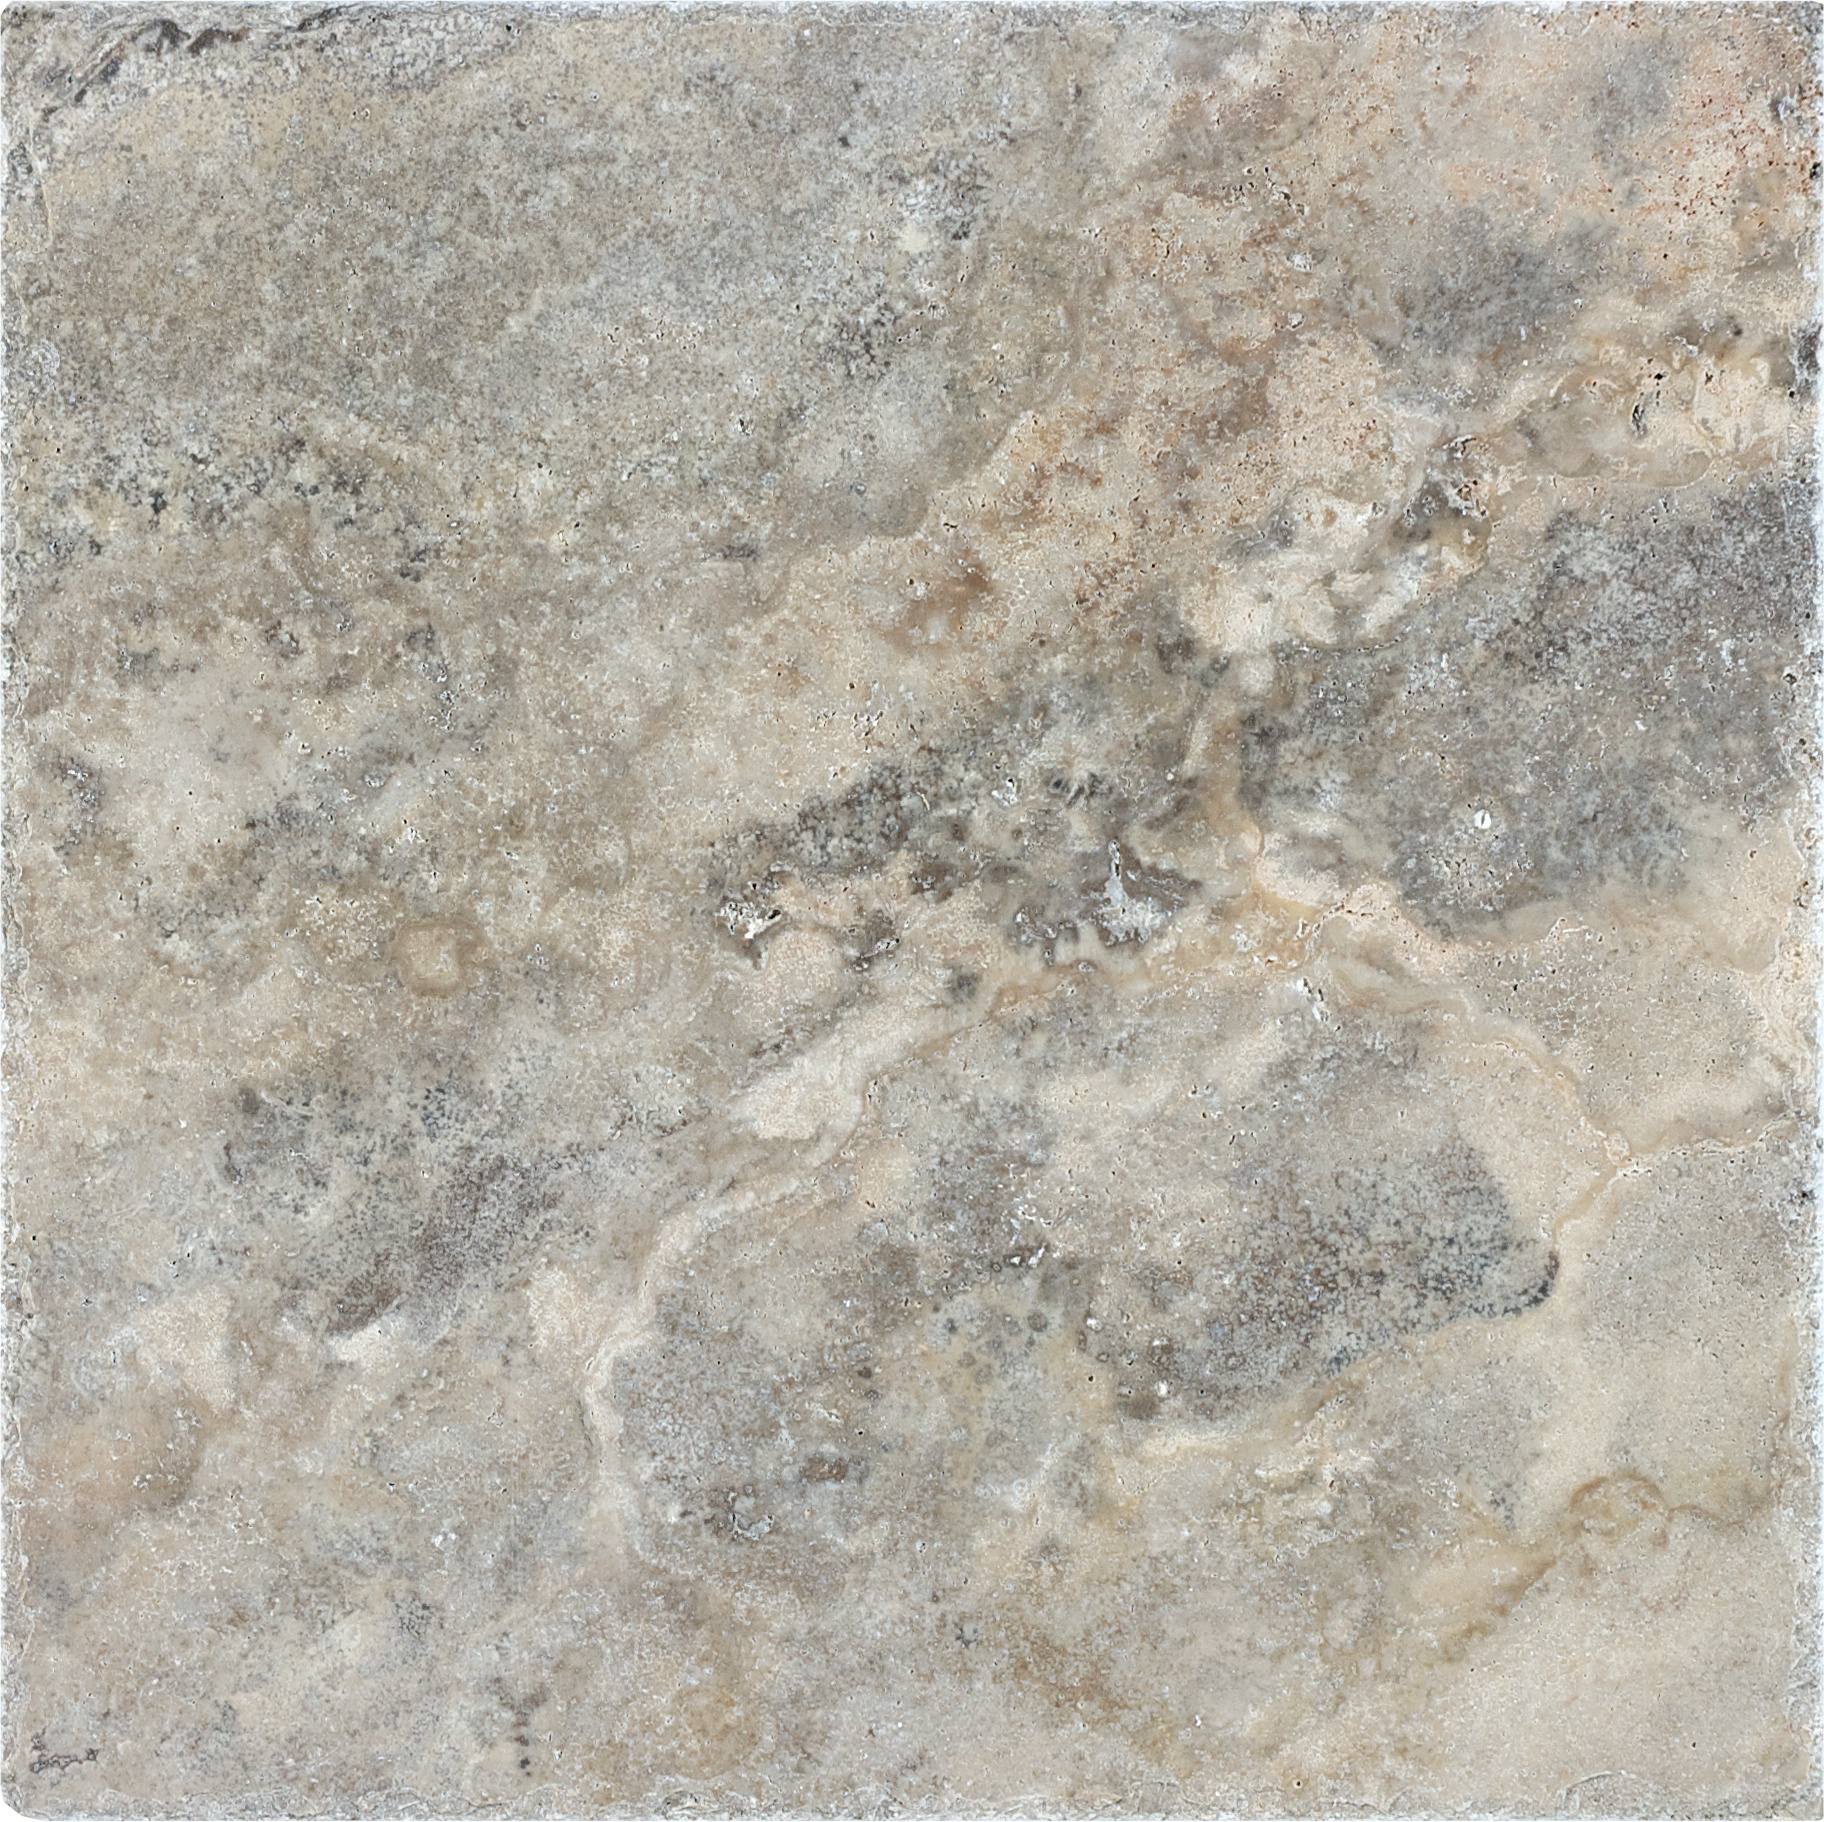 travertine pattern natural stone field tile from silver ash anatolia collection distributed by surface group international brushed finish chiseled edge 16x16 square shape